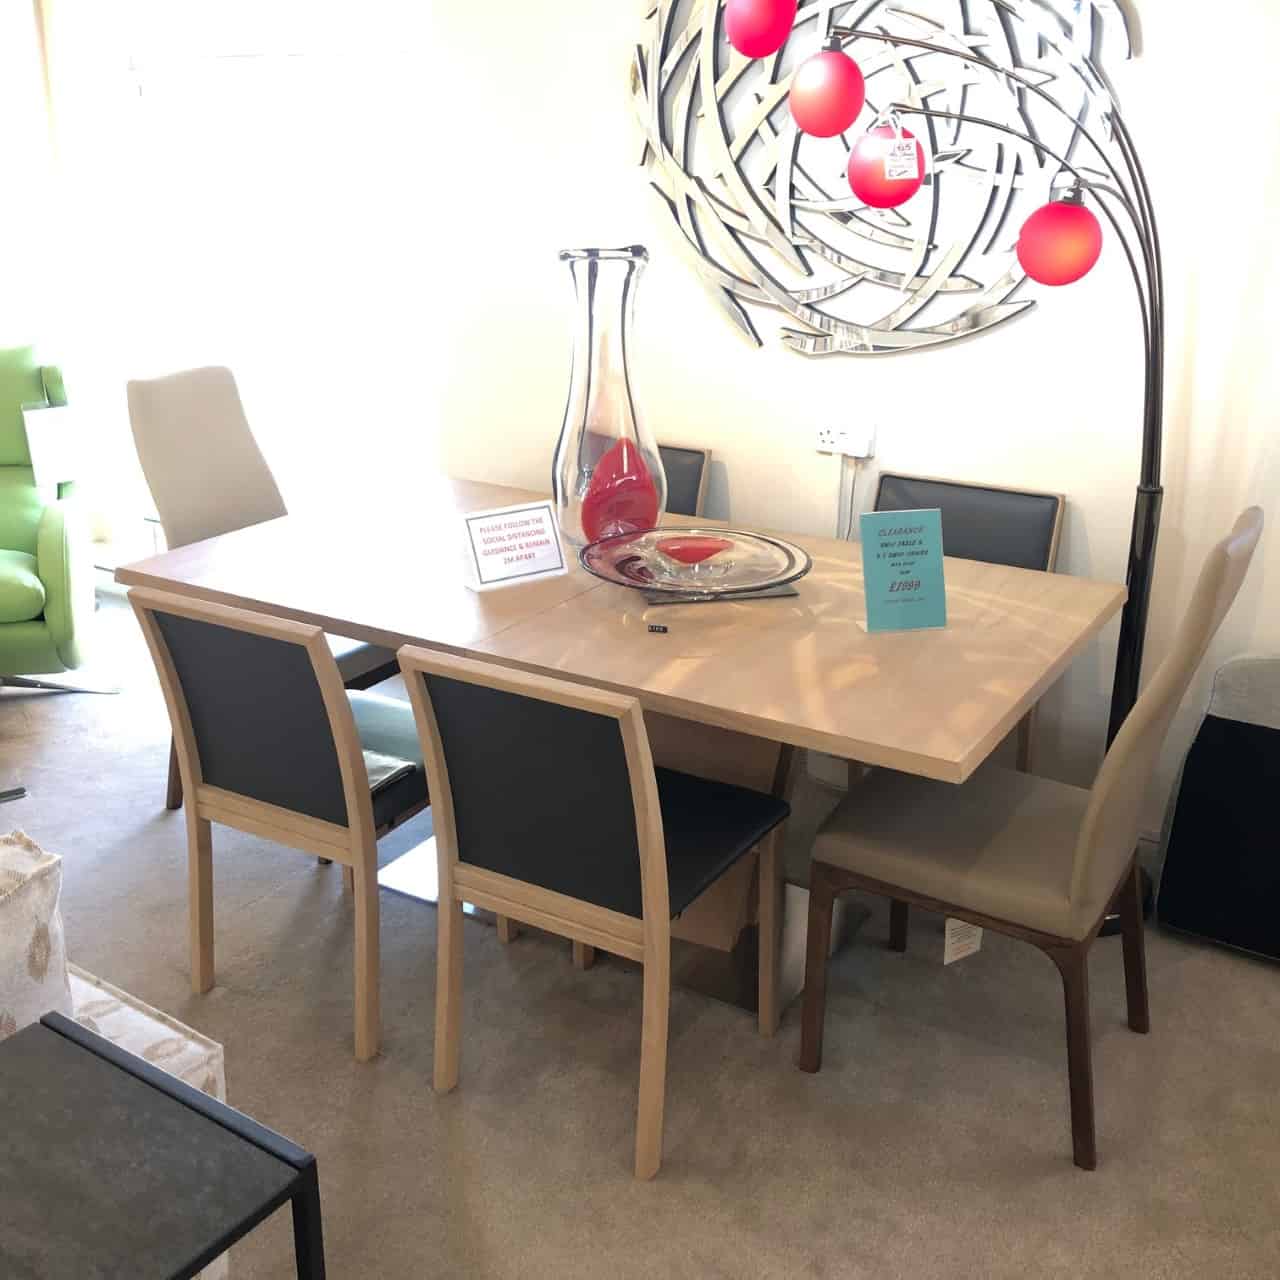 Creatice Dining Table Sets Clearance for Small Space